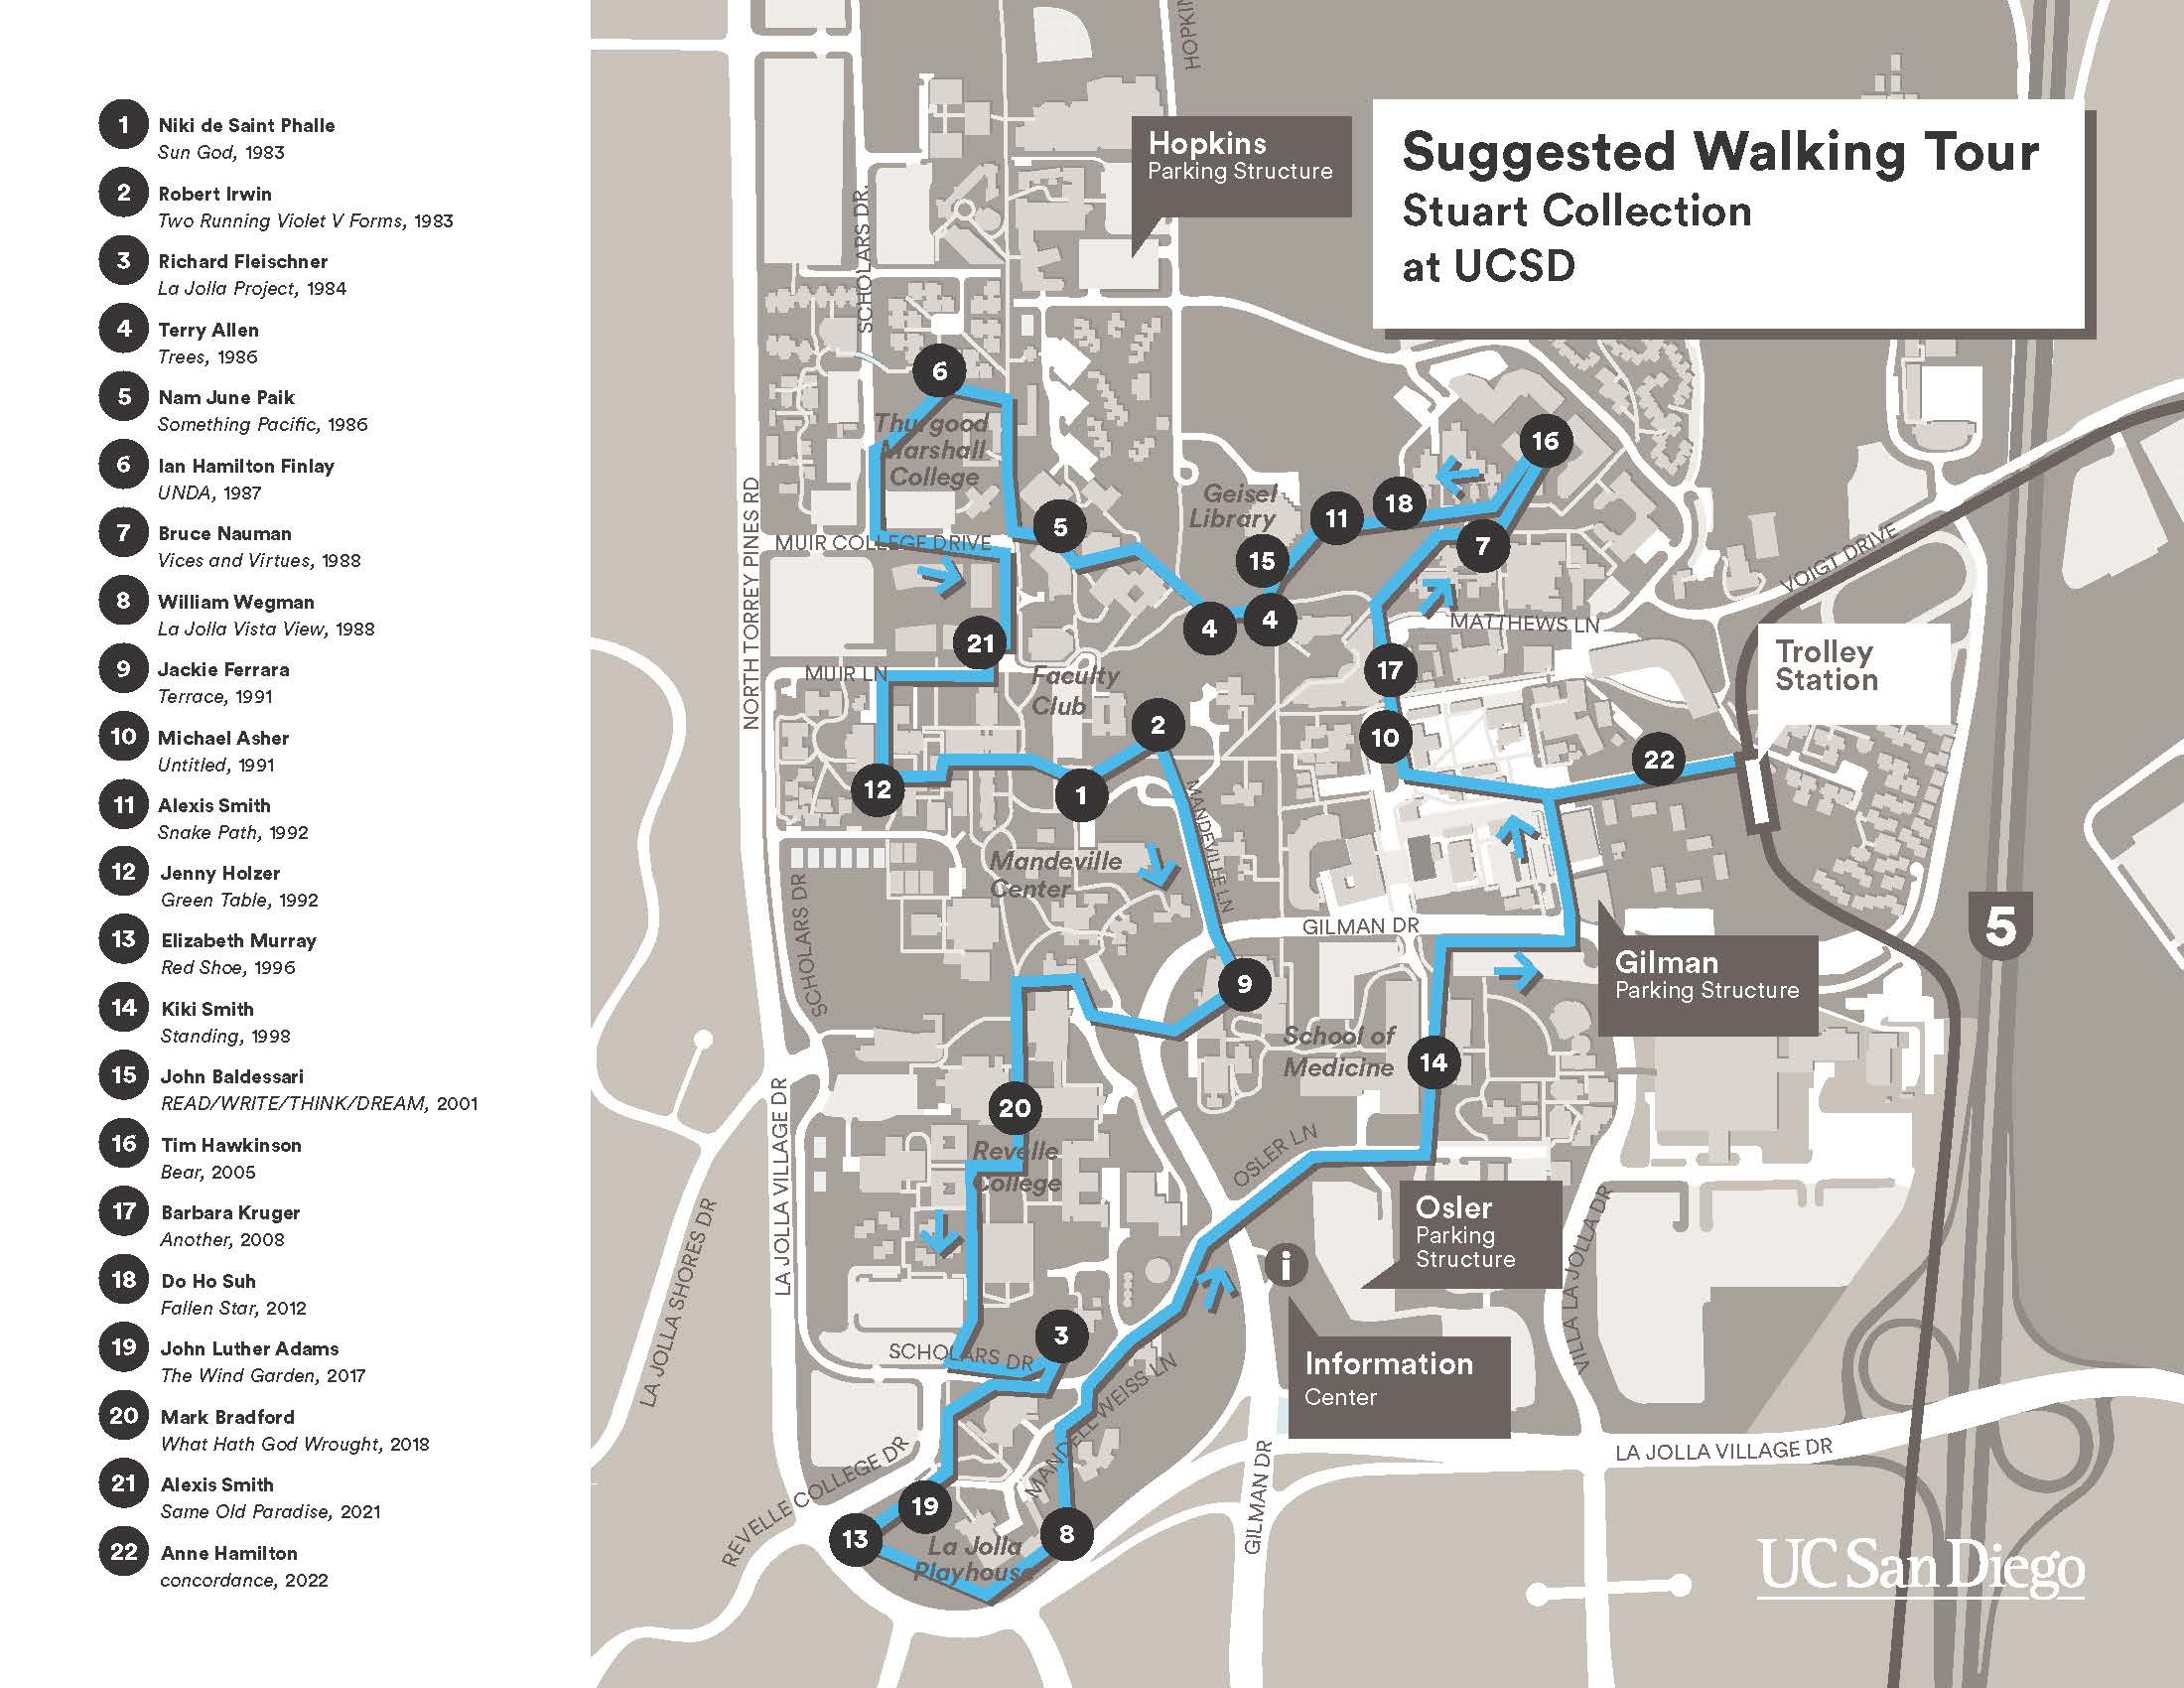 Self-guided tour of the sculptures that are part of the UC San Diego Stuart Collection